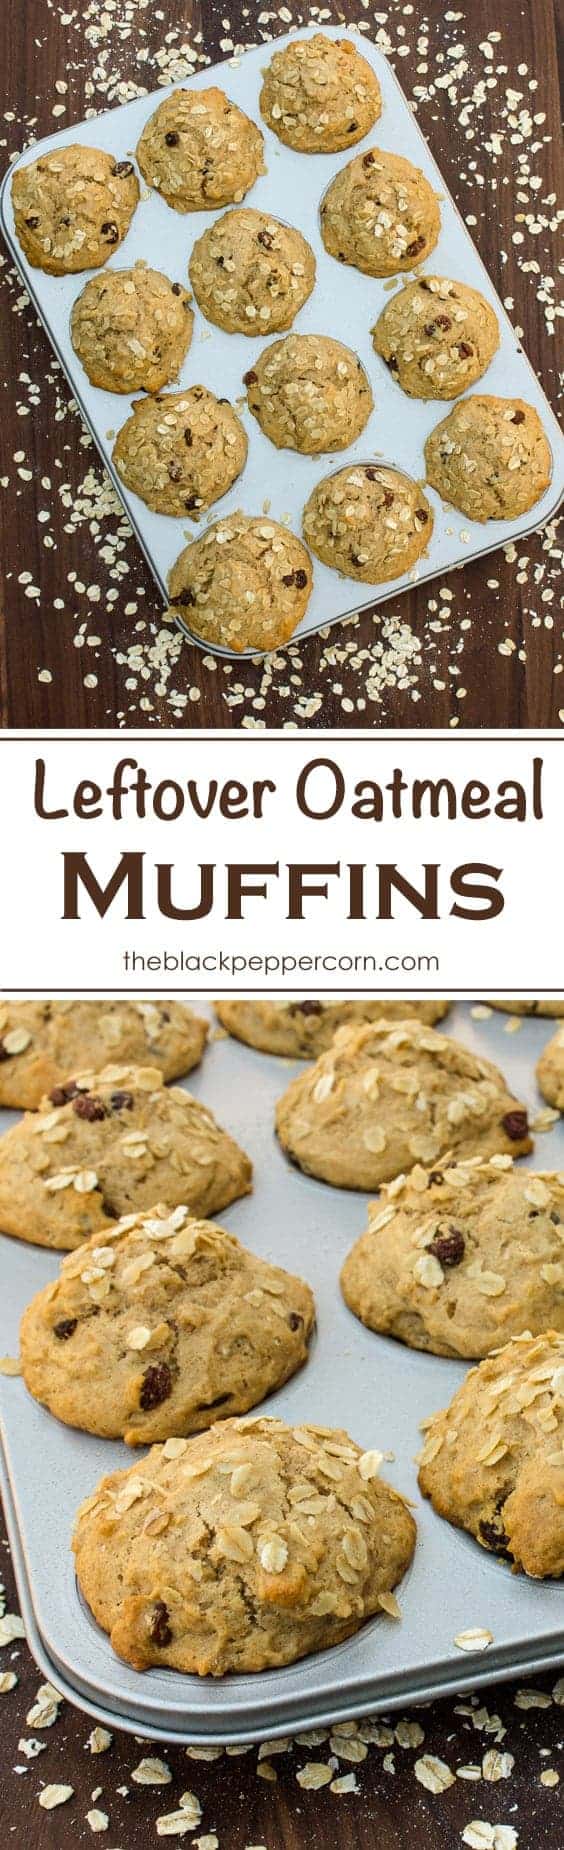 Leftover Oatmeal Muffins